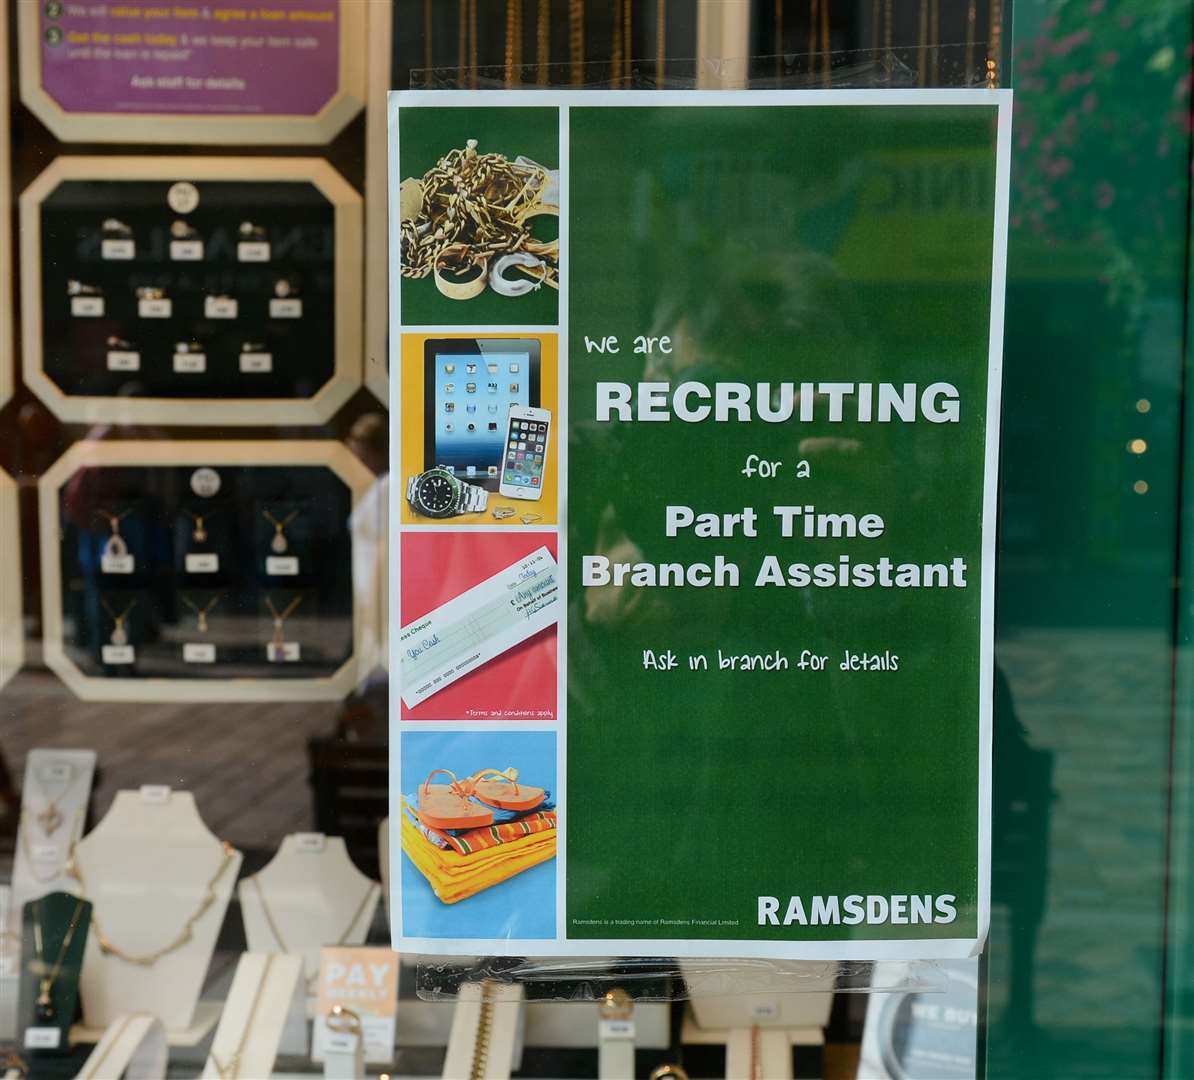 Recruiment remains an issue for some businesses.